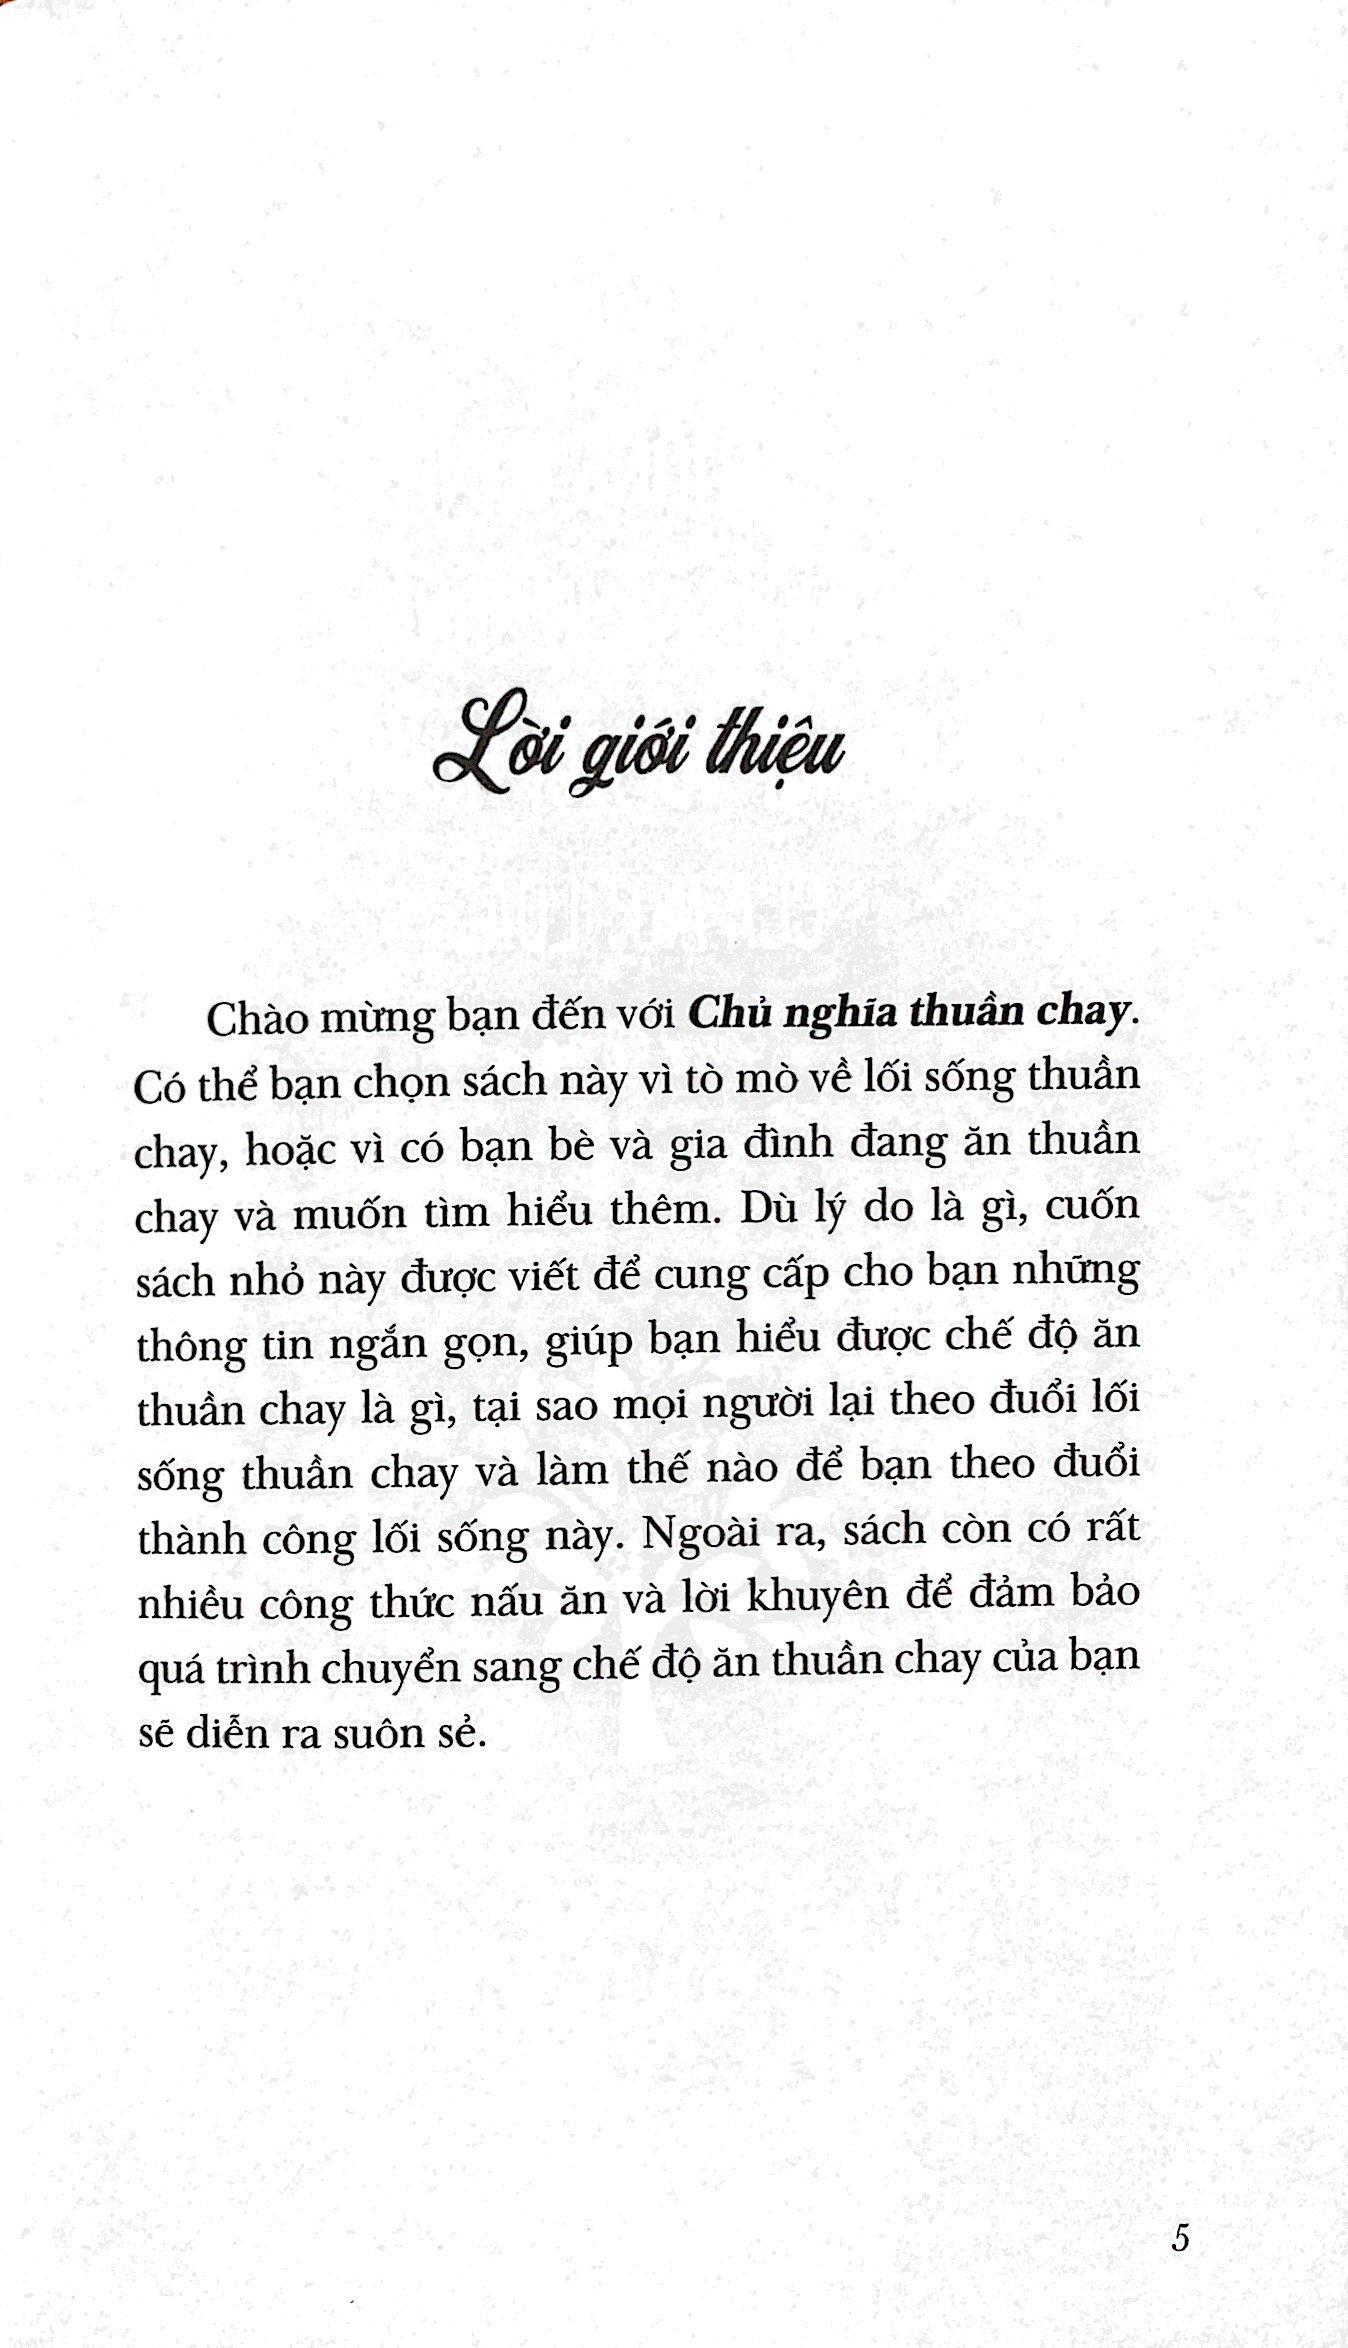 The Little Book Of The Veganism - Chủ Nghĩa Thuần Chay